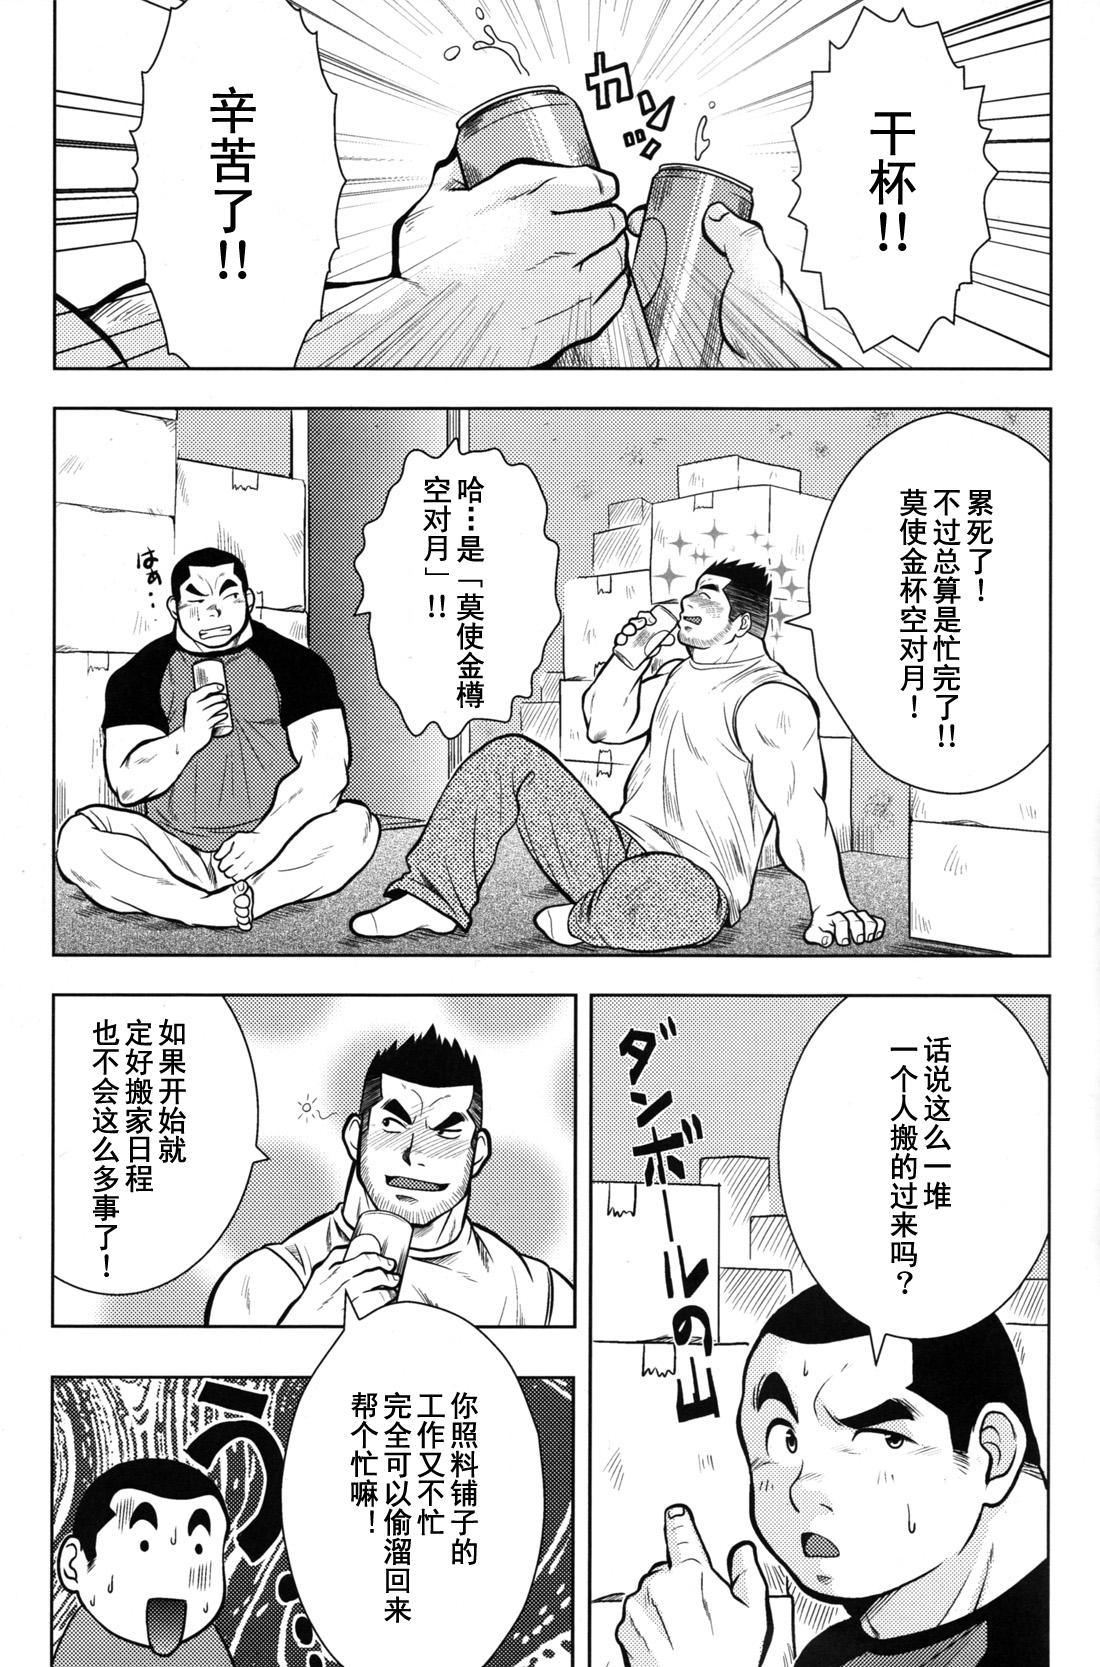 Old Young どうぞよろしく! Pick Up - Page 3